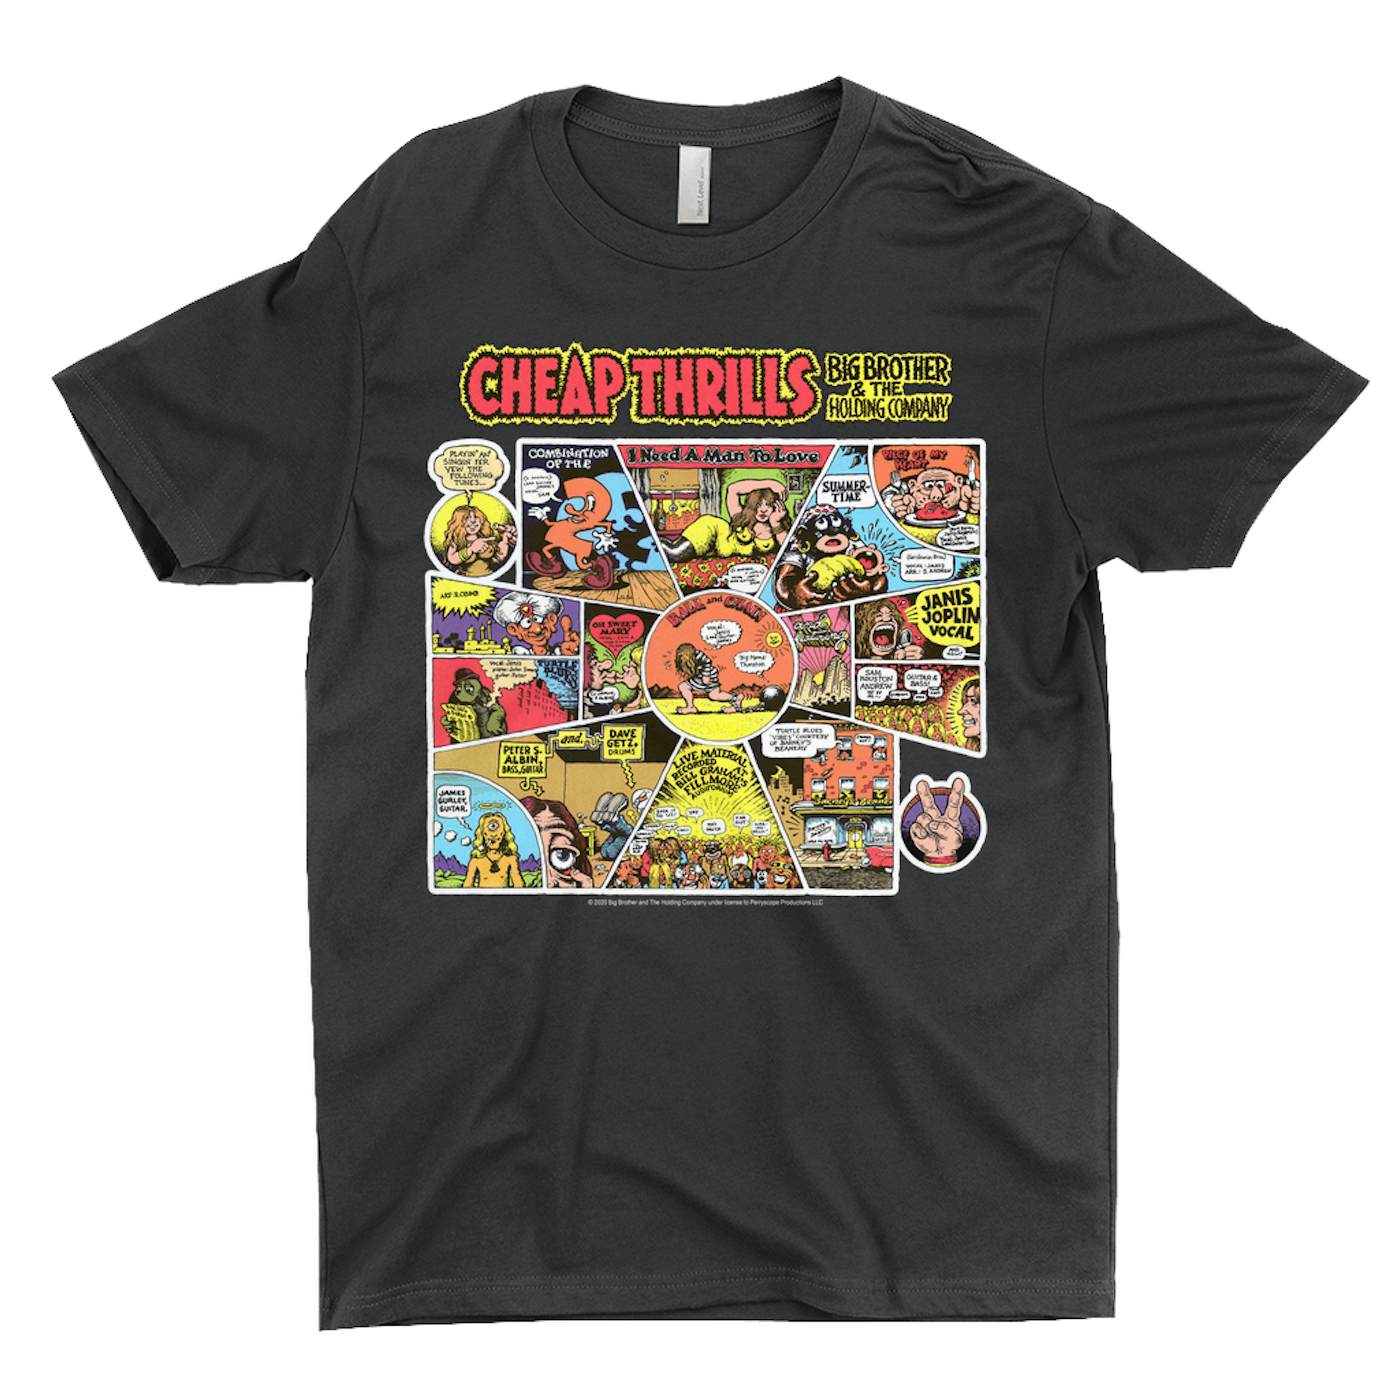 Big Brother & The Holding Company T-Shirt | Cheap Thrills In Black Background Big Brother And The Holding Company Shirt